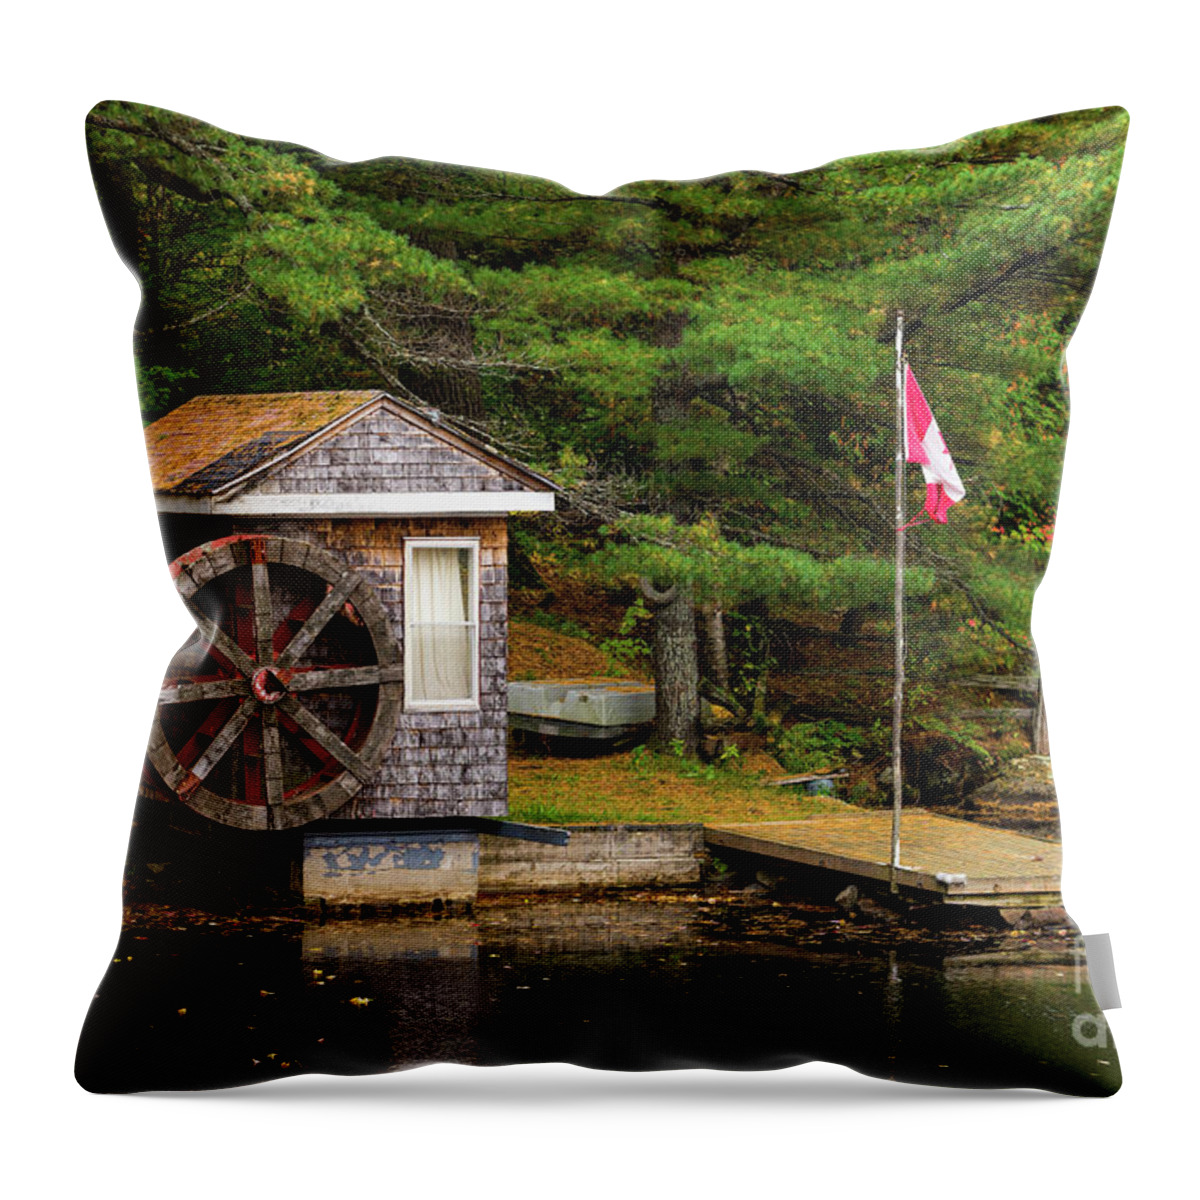 Colors Throw Pillow featuring the photograph Small shed with a large wooden wheel by Les Palenik